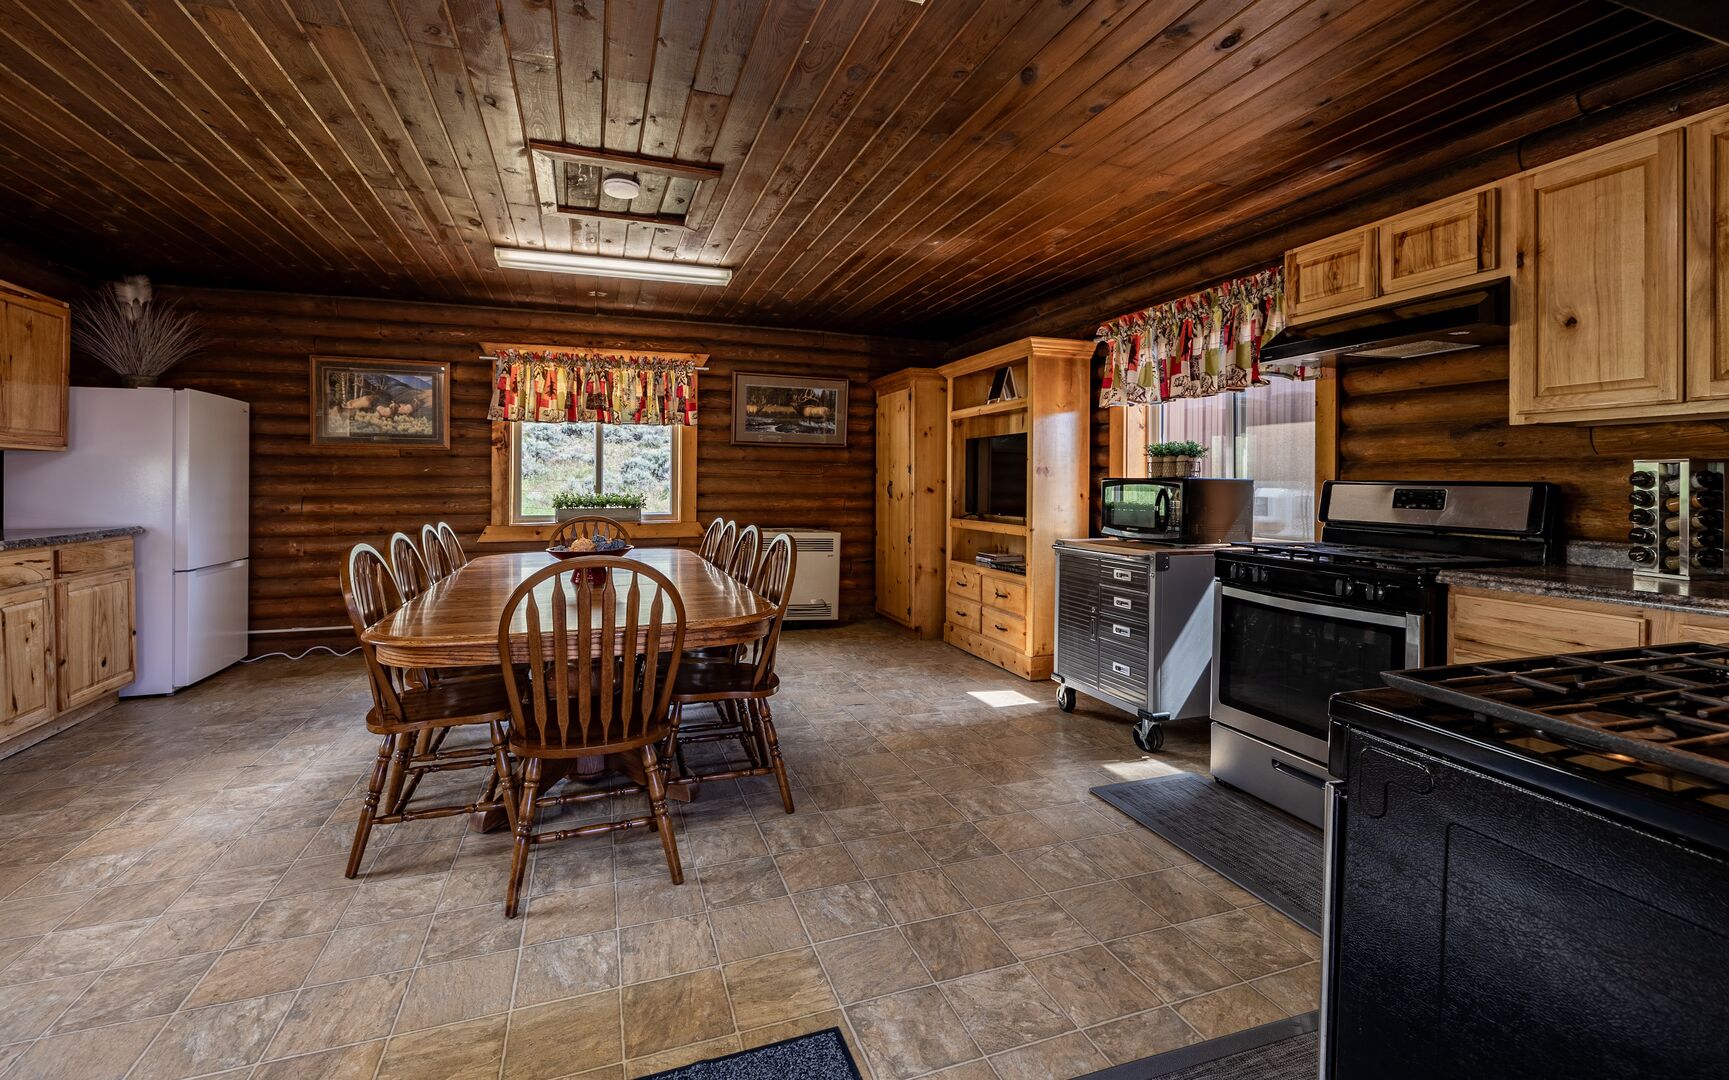 Dining cabin features a full kitchen with two ranges and seating for 10 guests